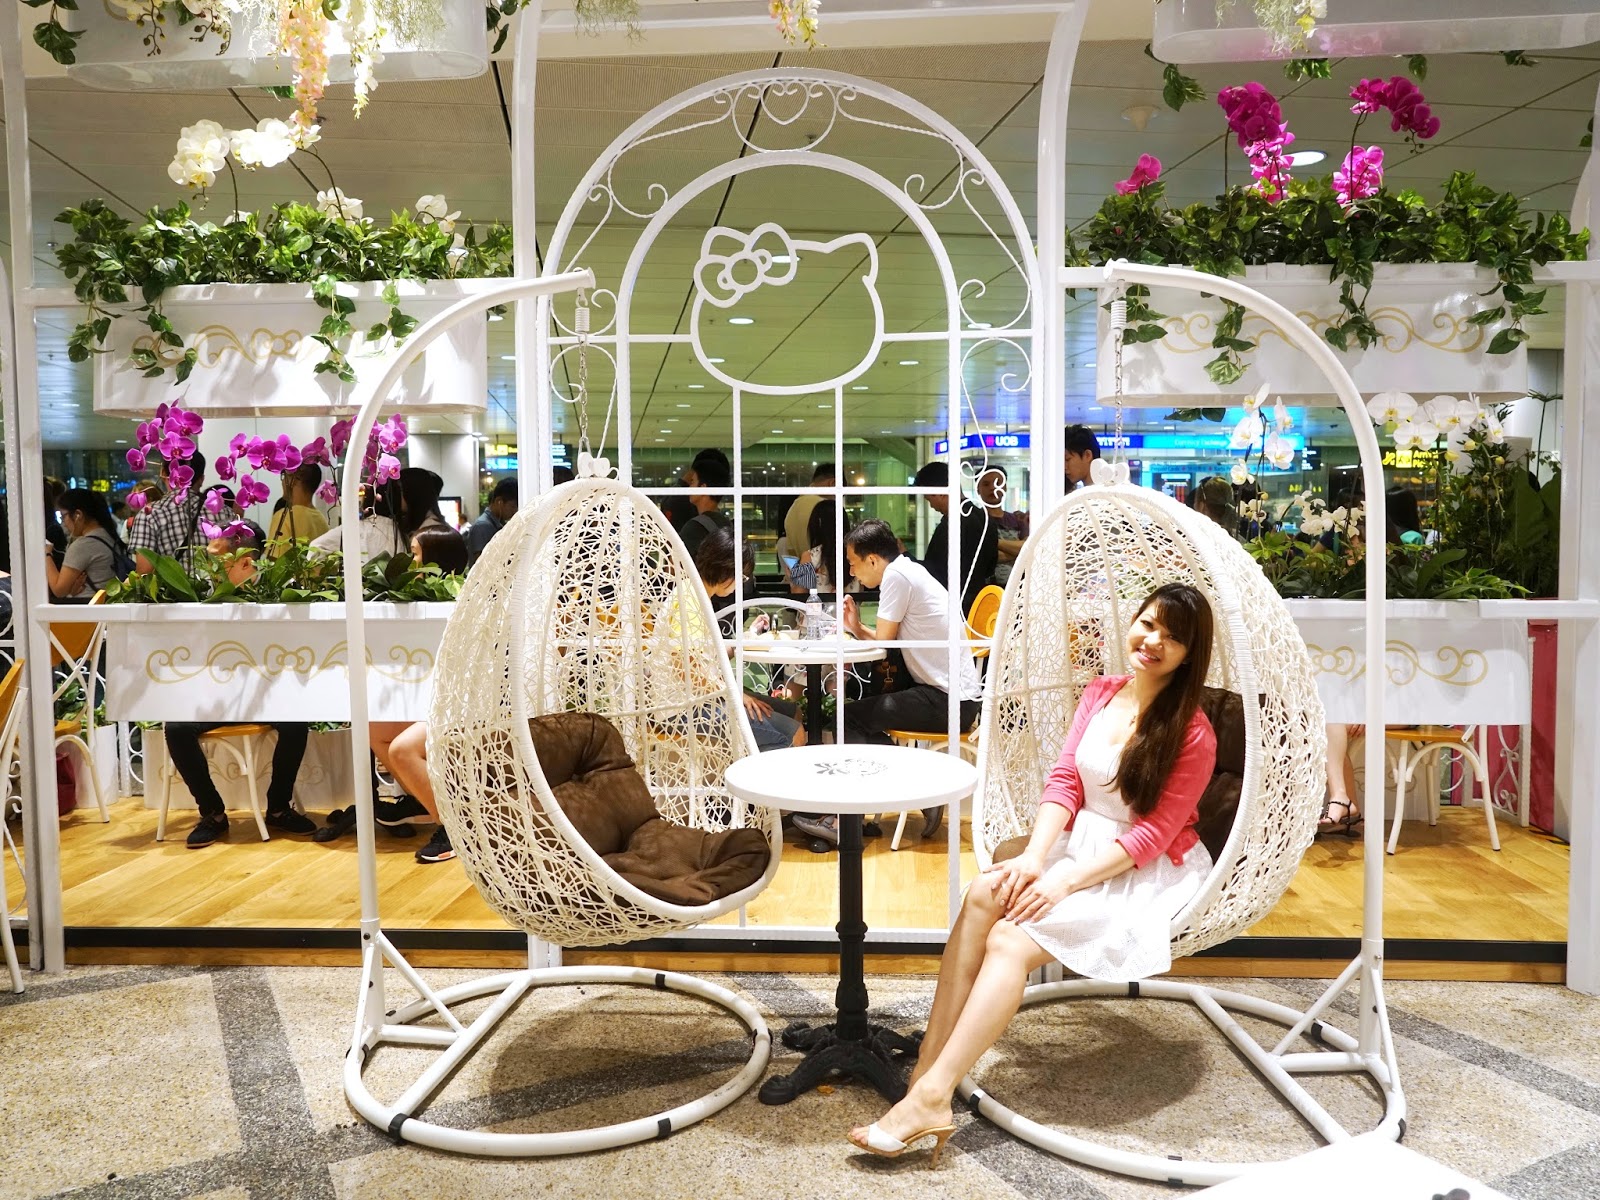 World's first 24-hour Hello Kitty cafe opens at Singapore Changi